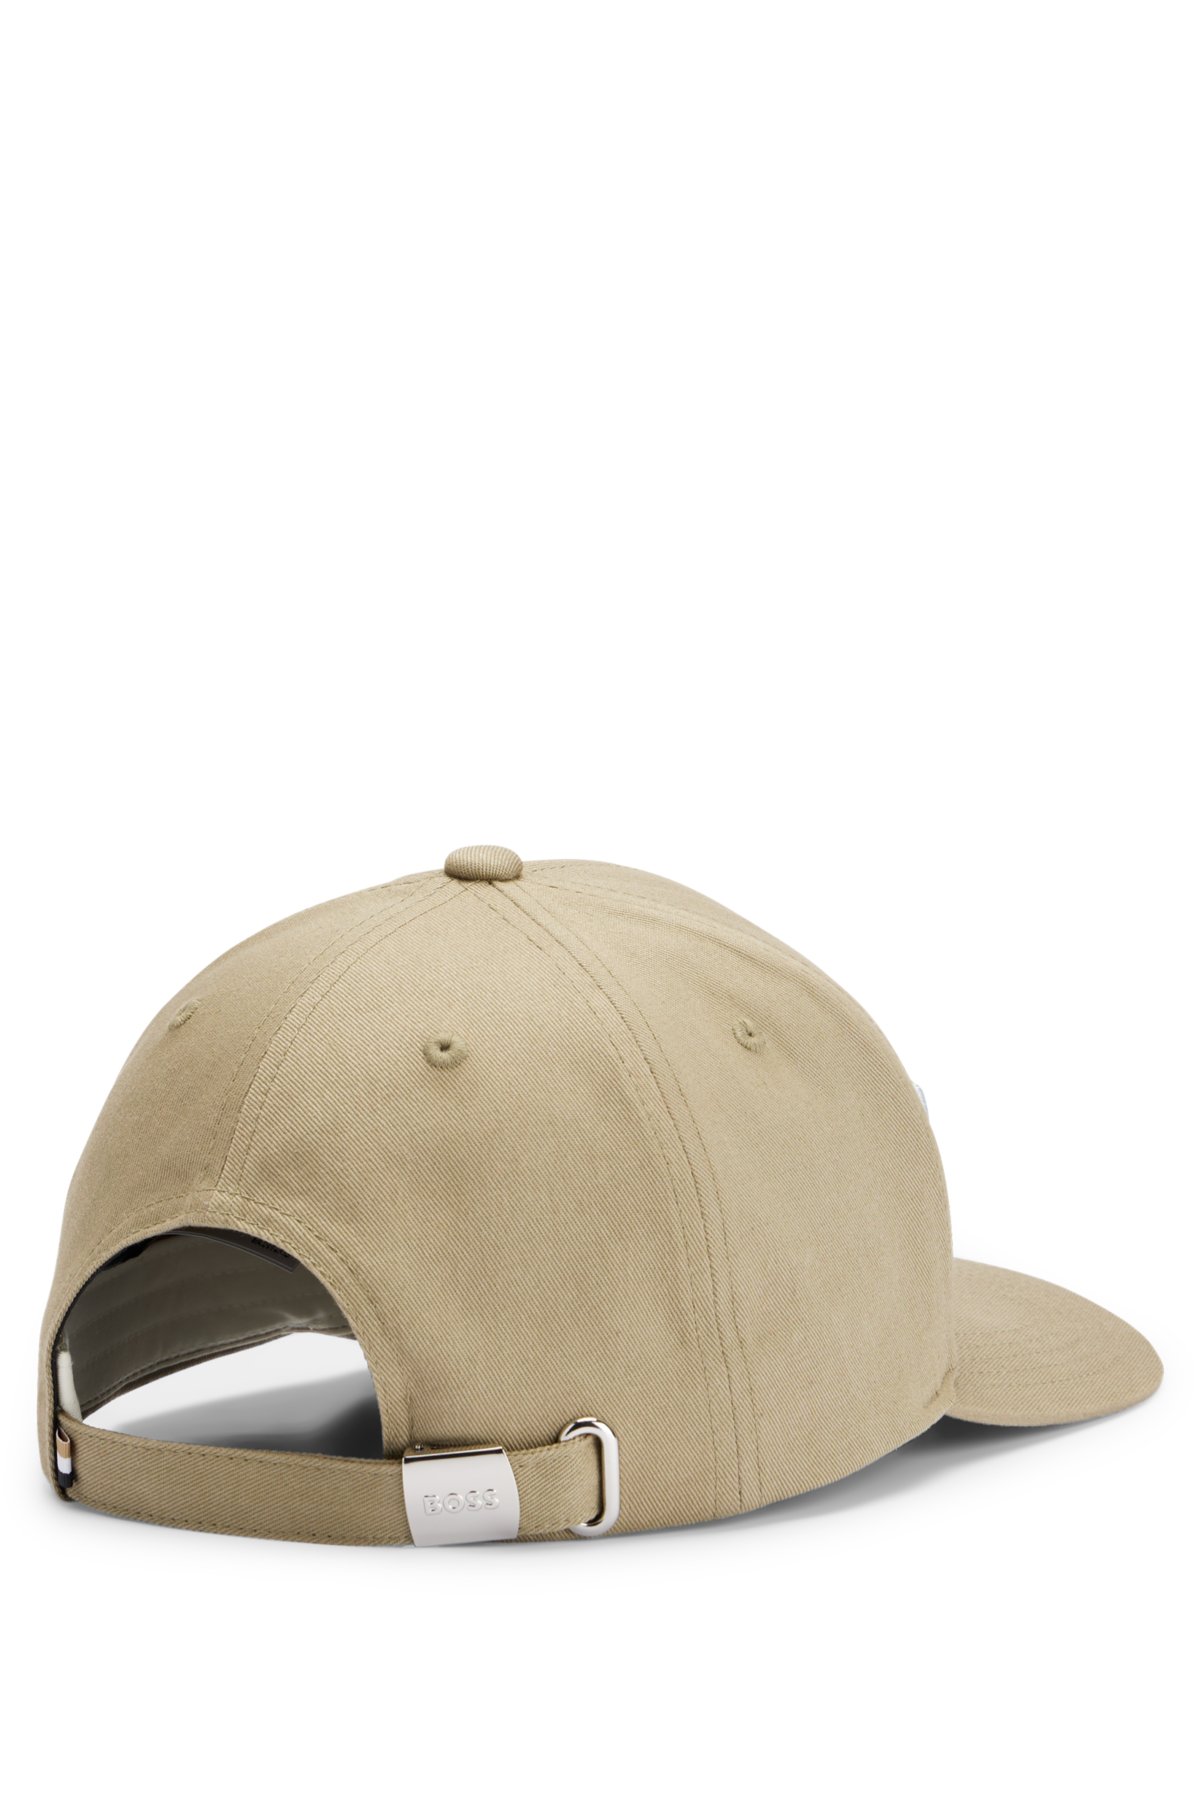 cap embroidered - BOSS logo adjustable strap Cotton-twill with and